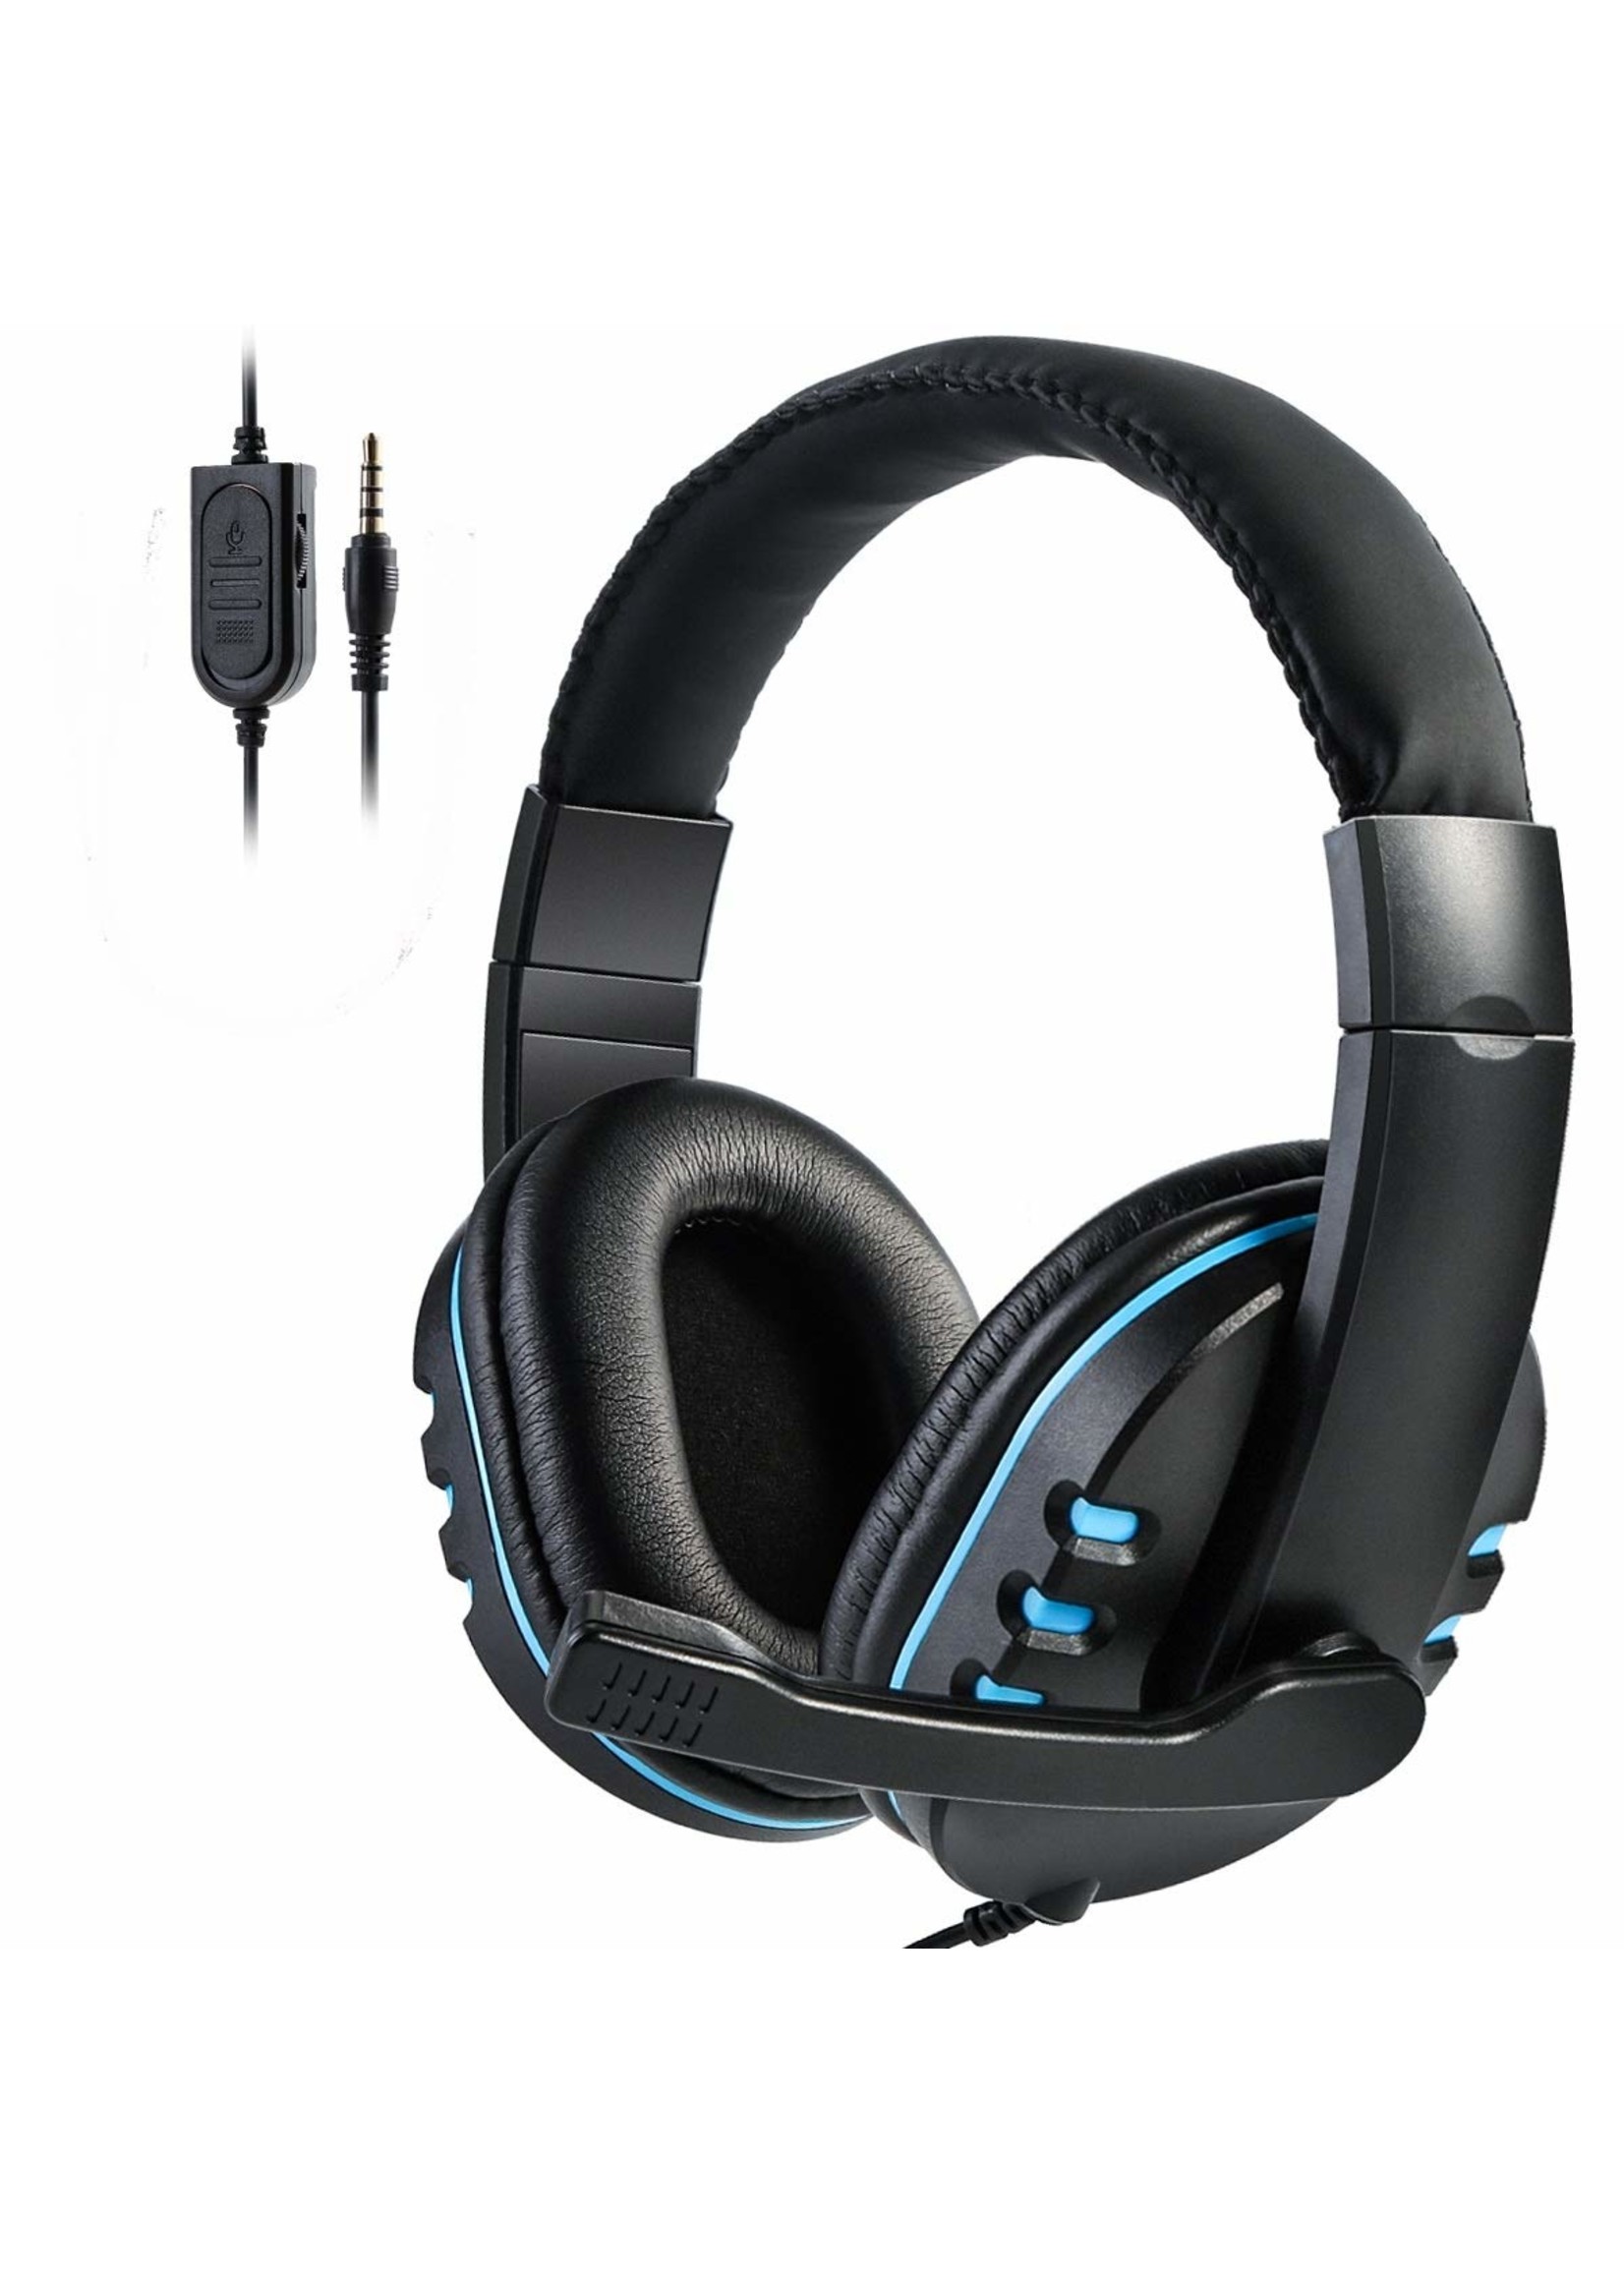 universal headset for xbox one and ps4